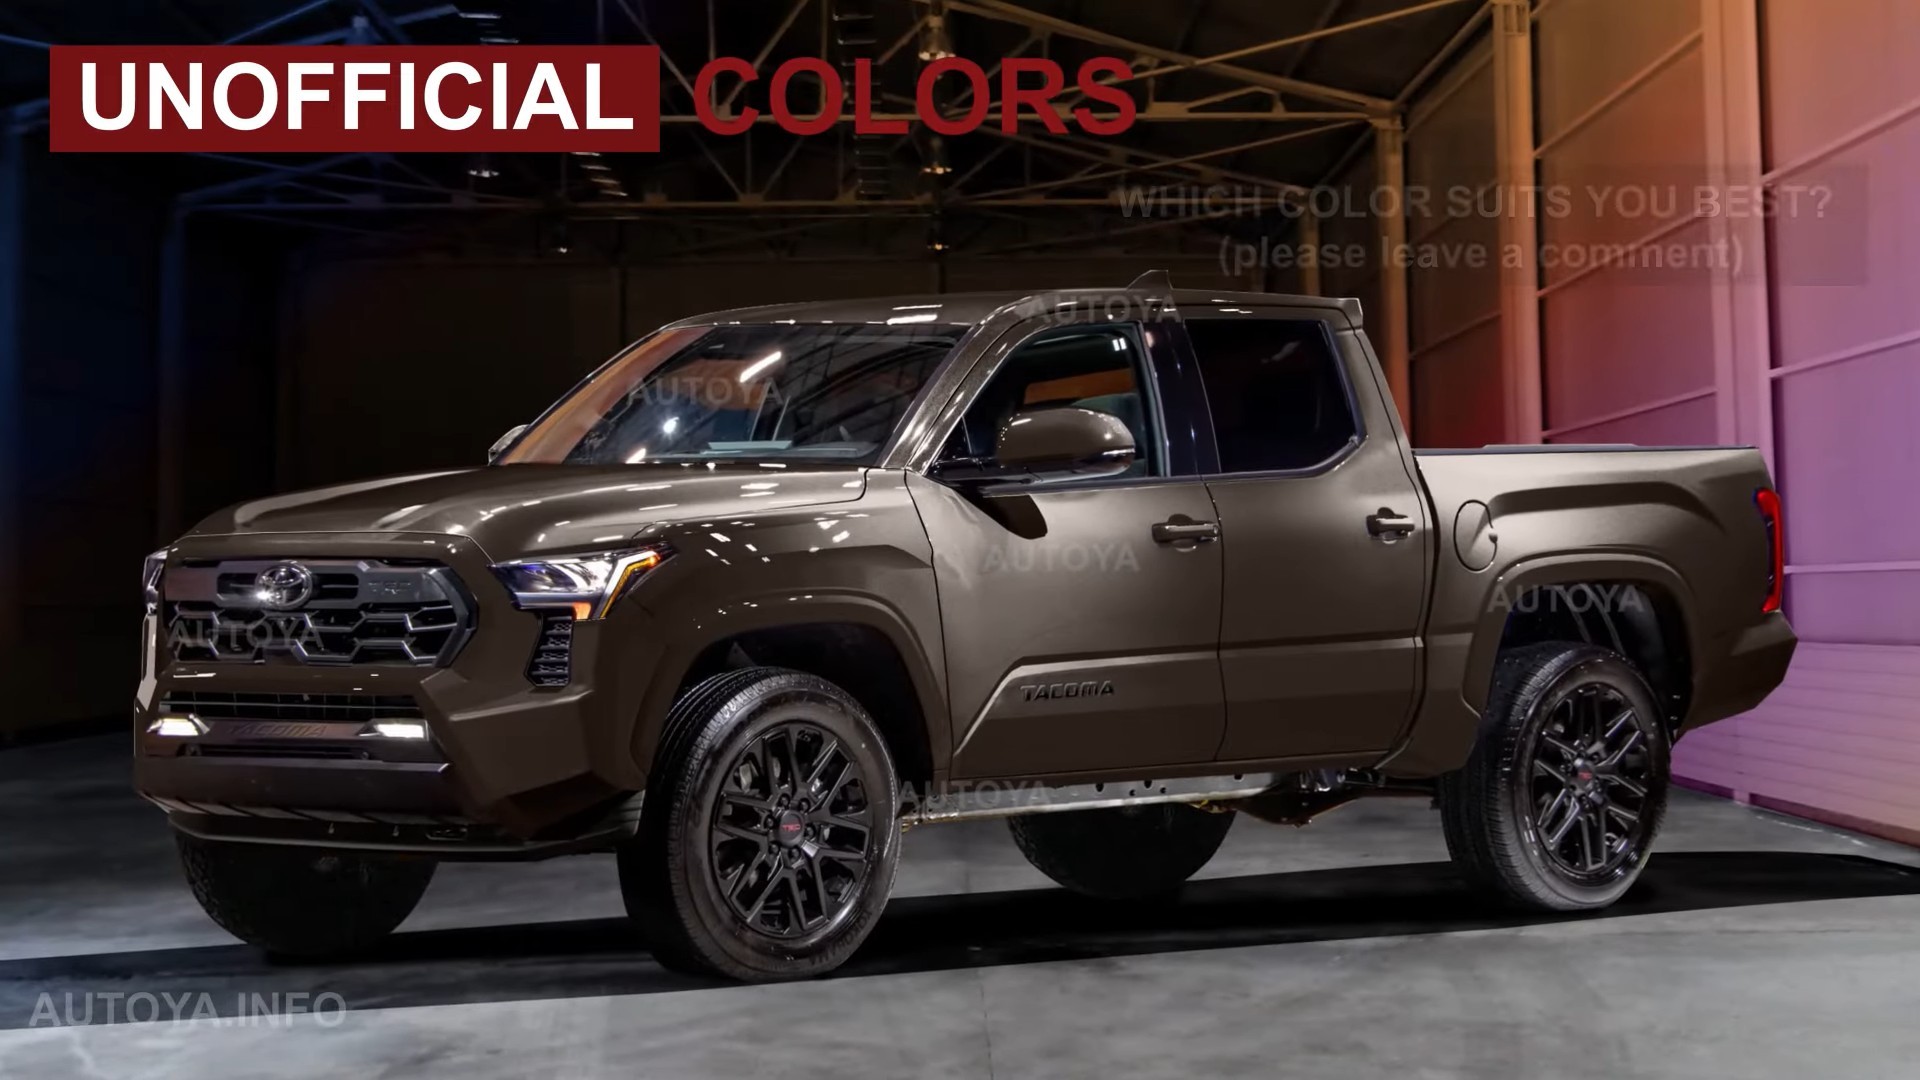 2024 Tacoma 2024 Tacoma TRD Colors Previewed Via CGI Renderings 2024-toyota-tacoma-trd-brandishes-all-juicy-color-options-albeit-only-in-cgi_26